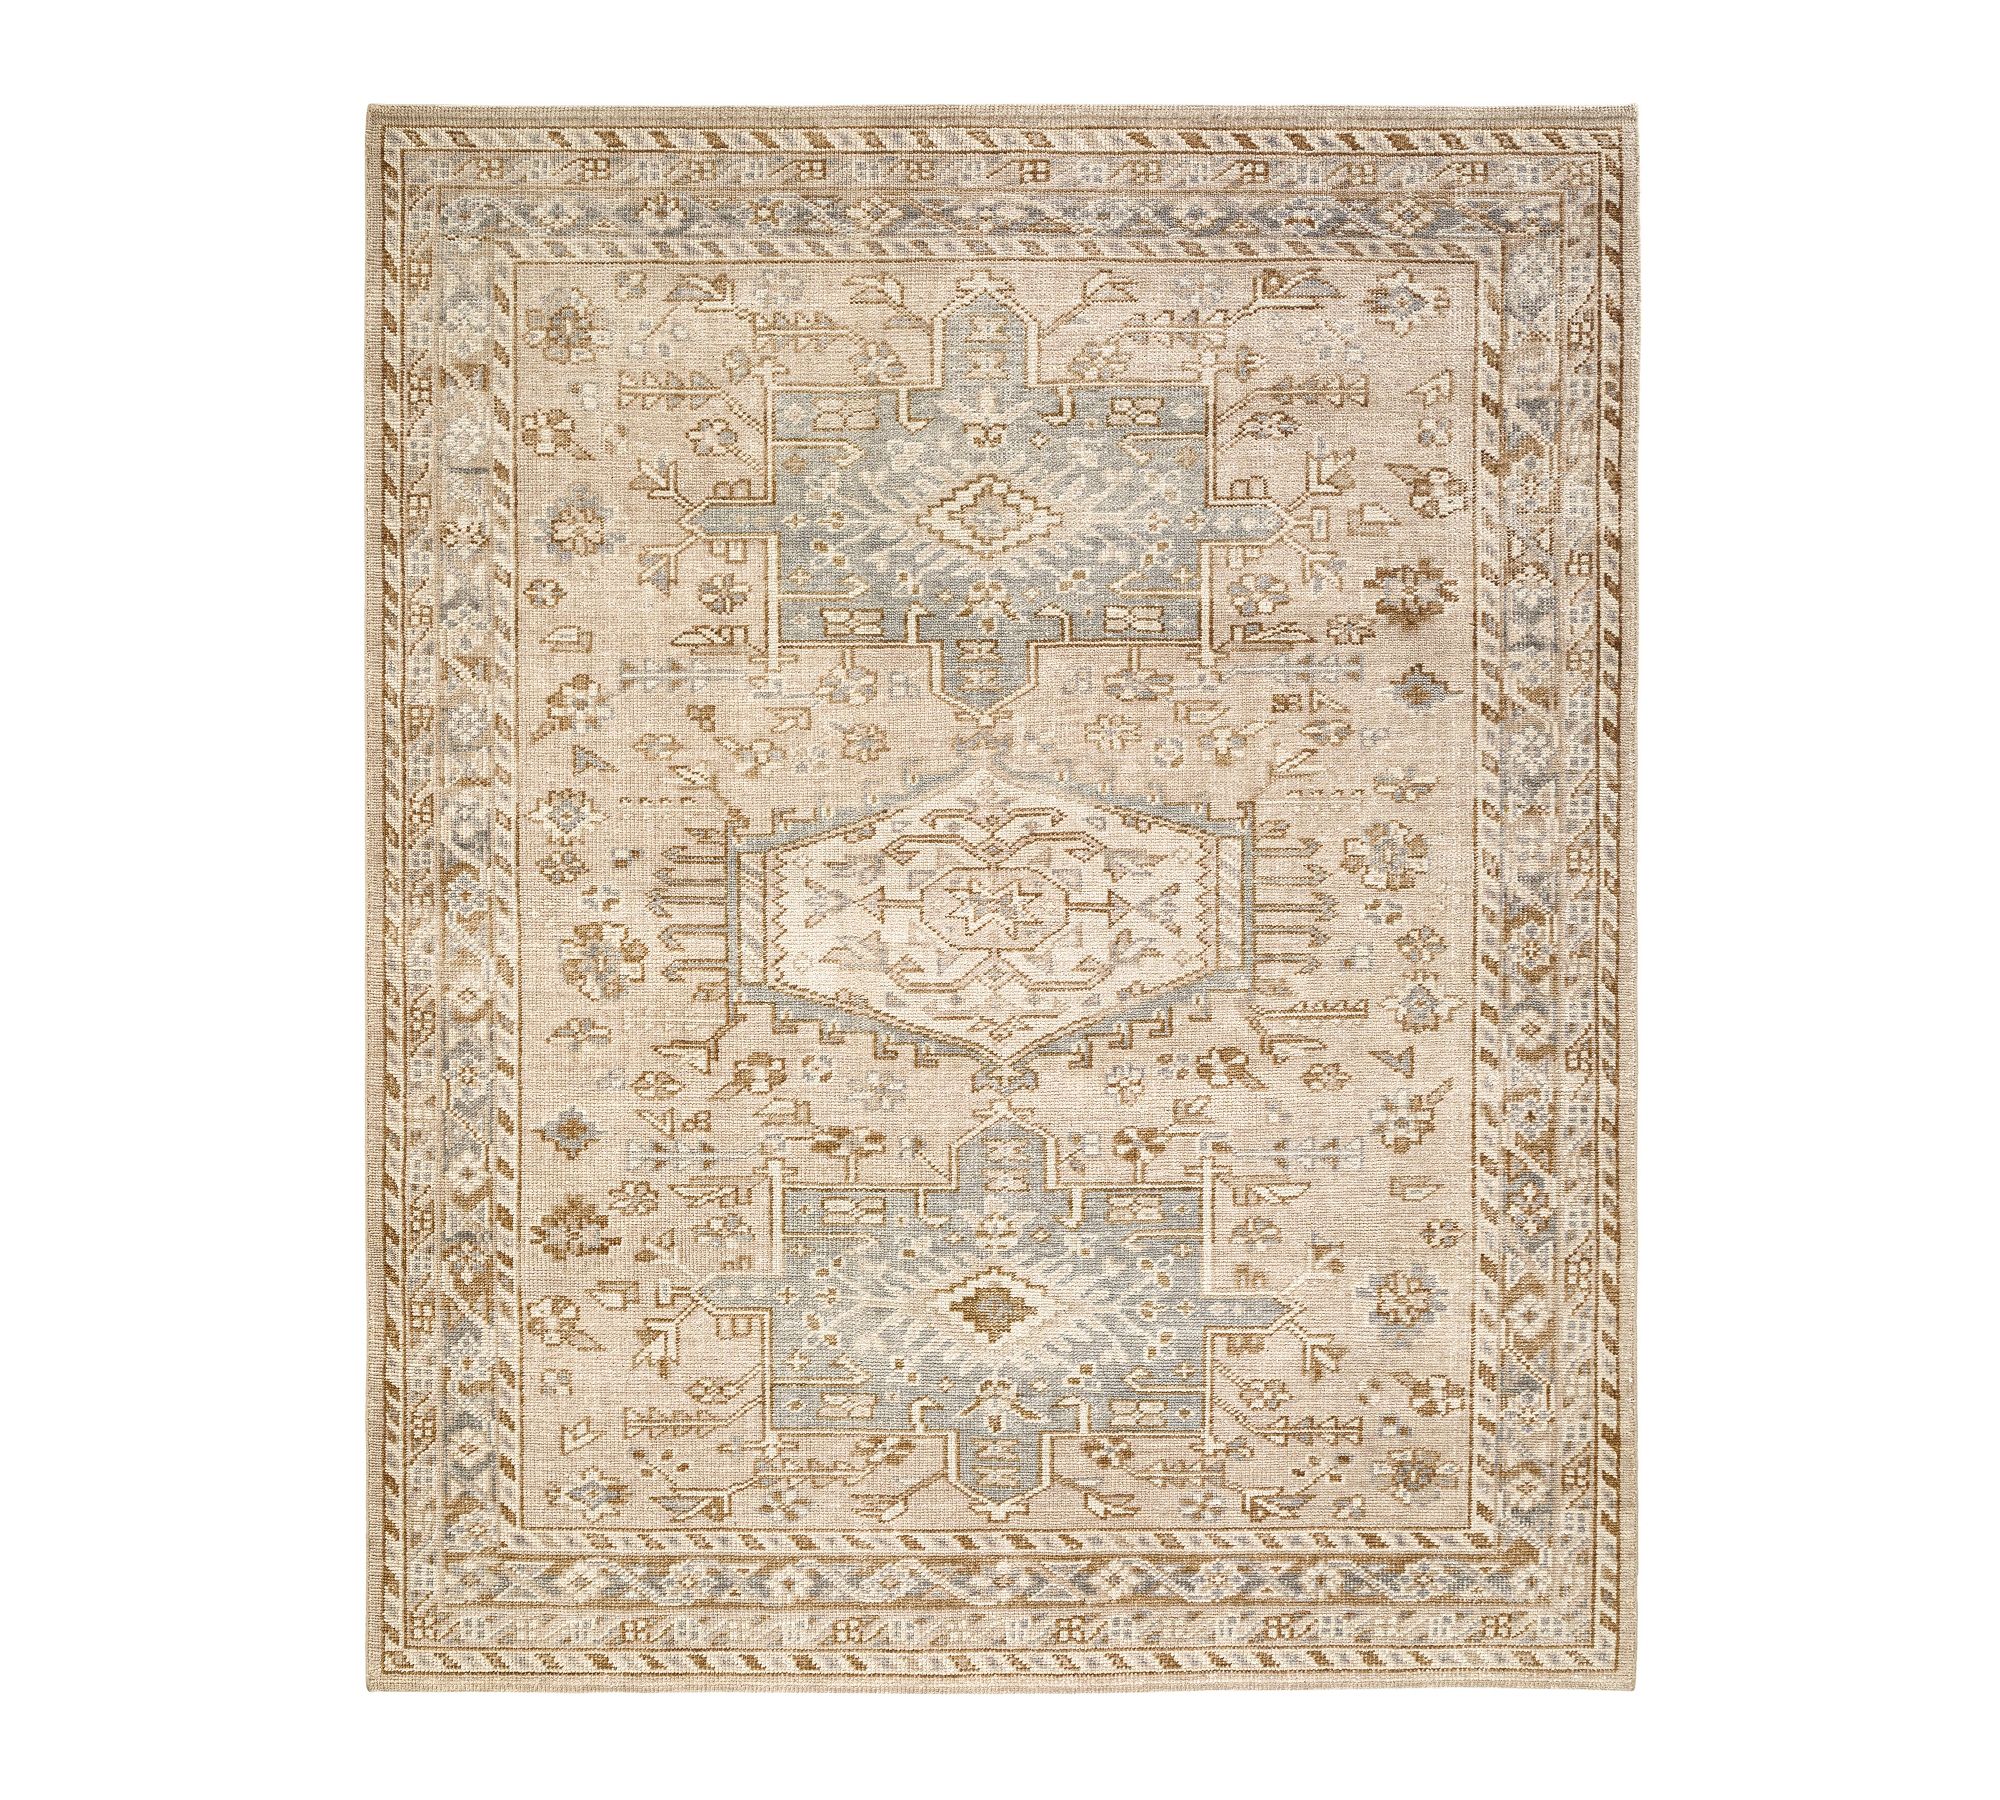 Bianca Hand-Knotted Wool Rug